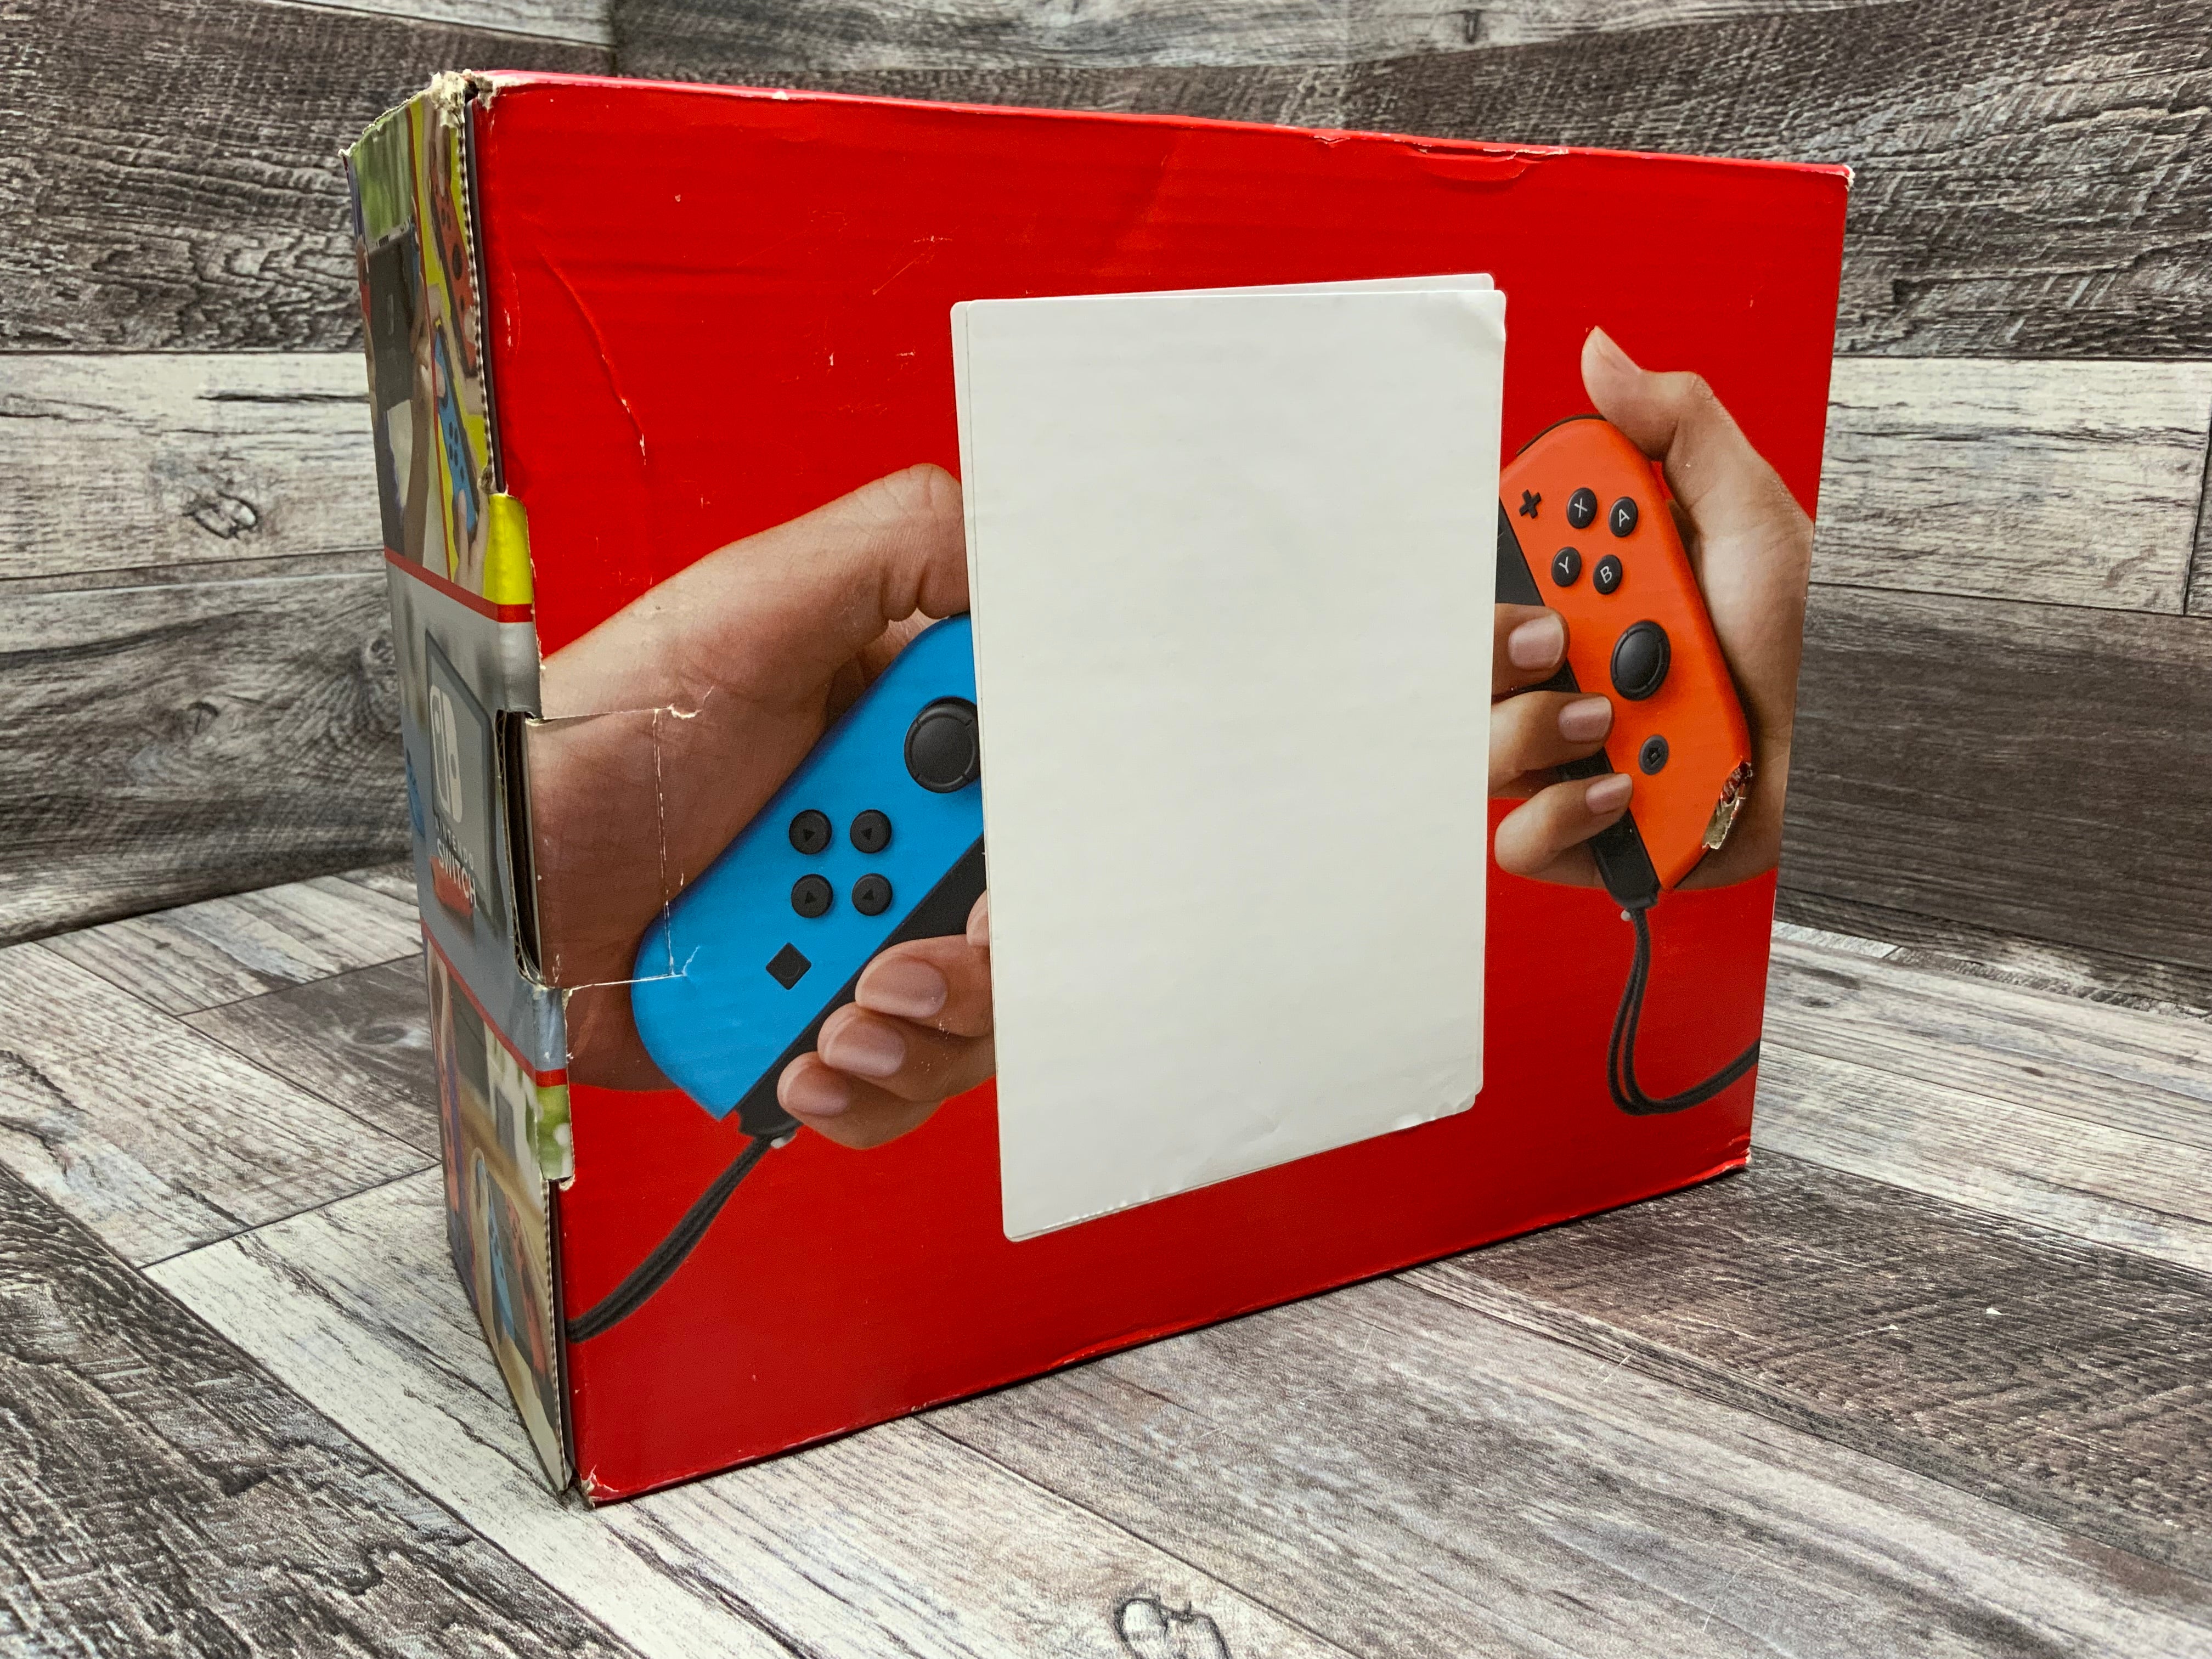 Nintendo Switch with Neon Blue and Neon Red Joy‑Con (8079135604974)